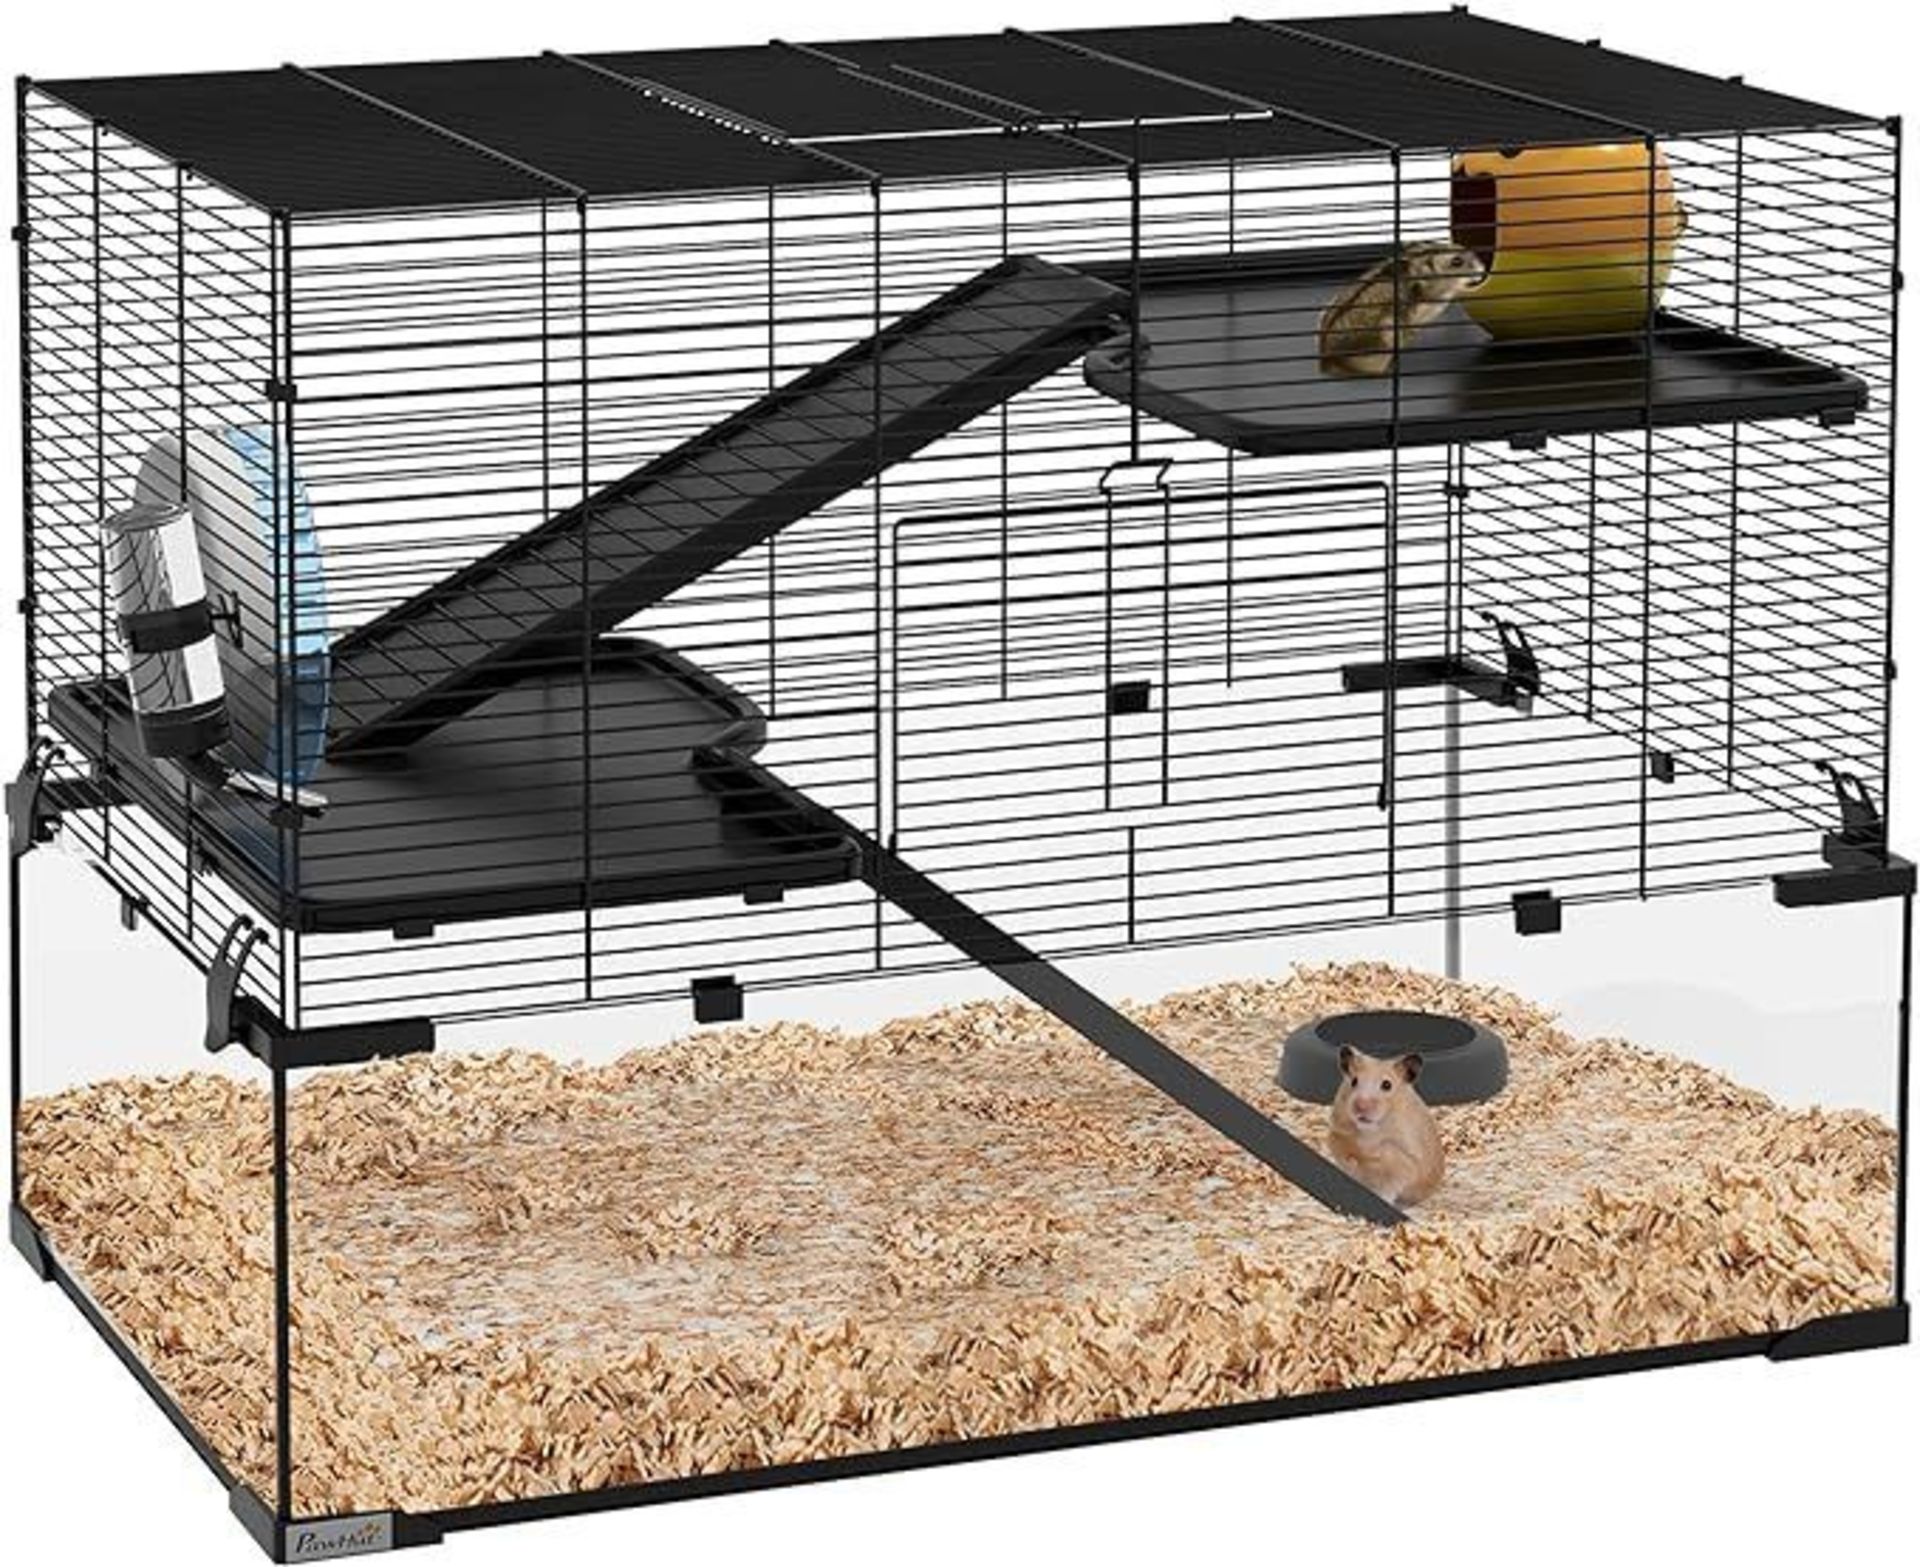 PawHut 3 Tiers Hamster Cage, Gerbil Cage with Deep Glass Bottom, Non-Slip Ramps, Platforms, Hut, - Image 2 of 2